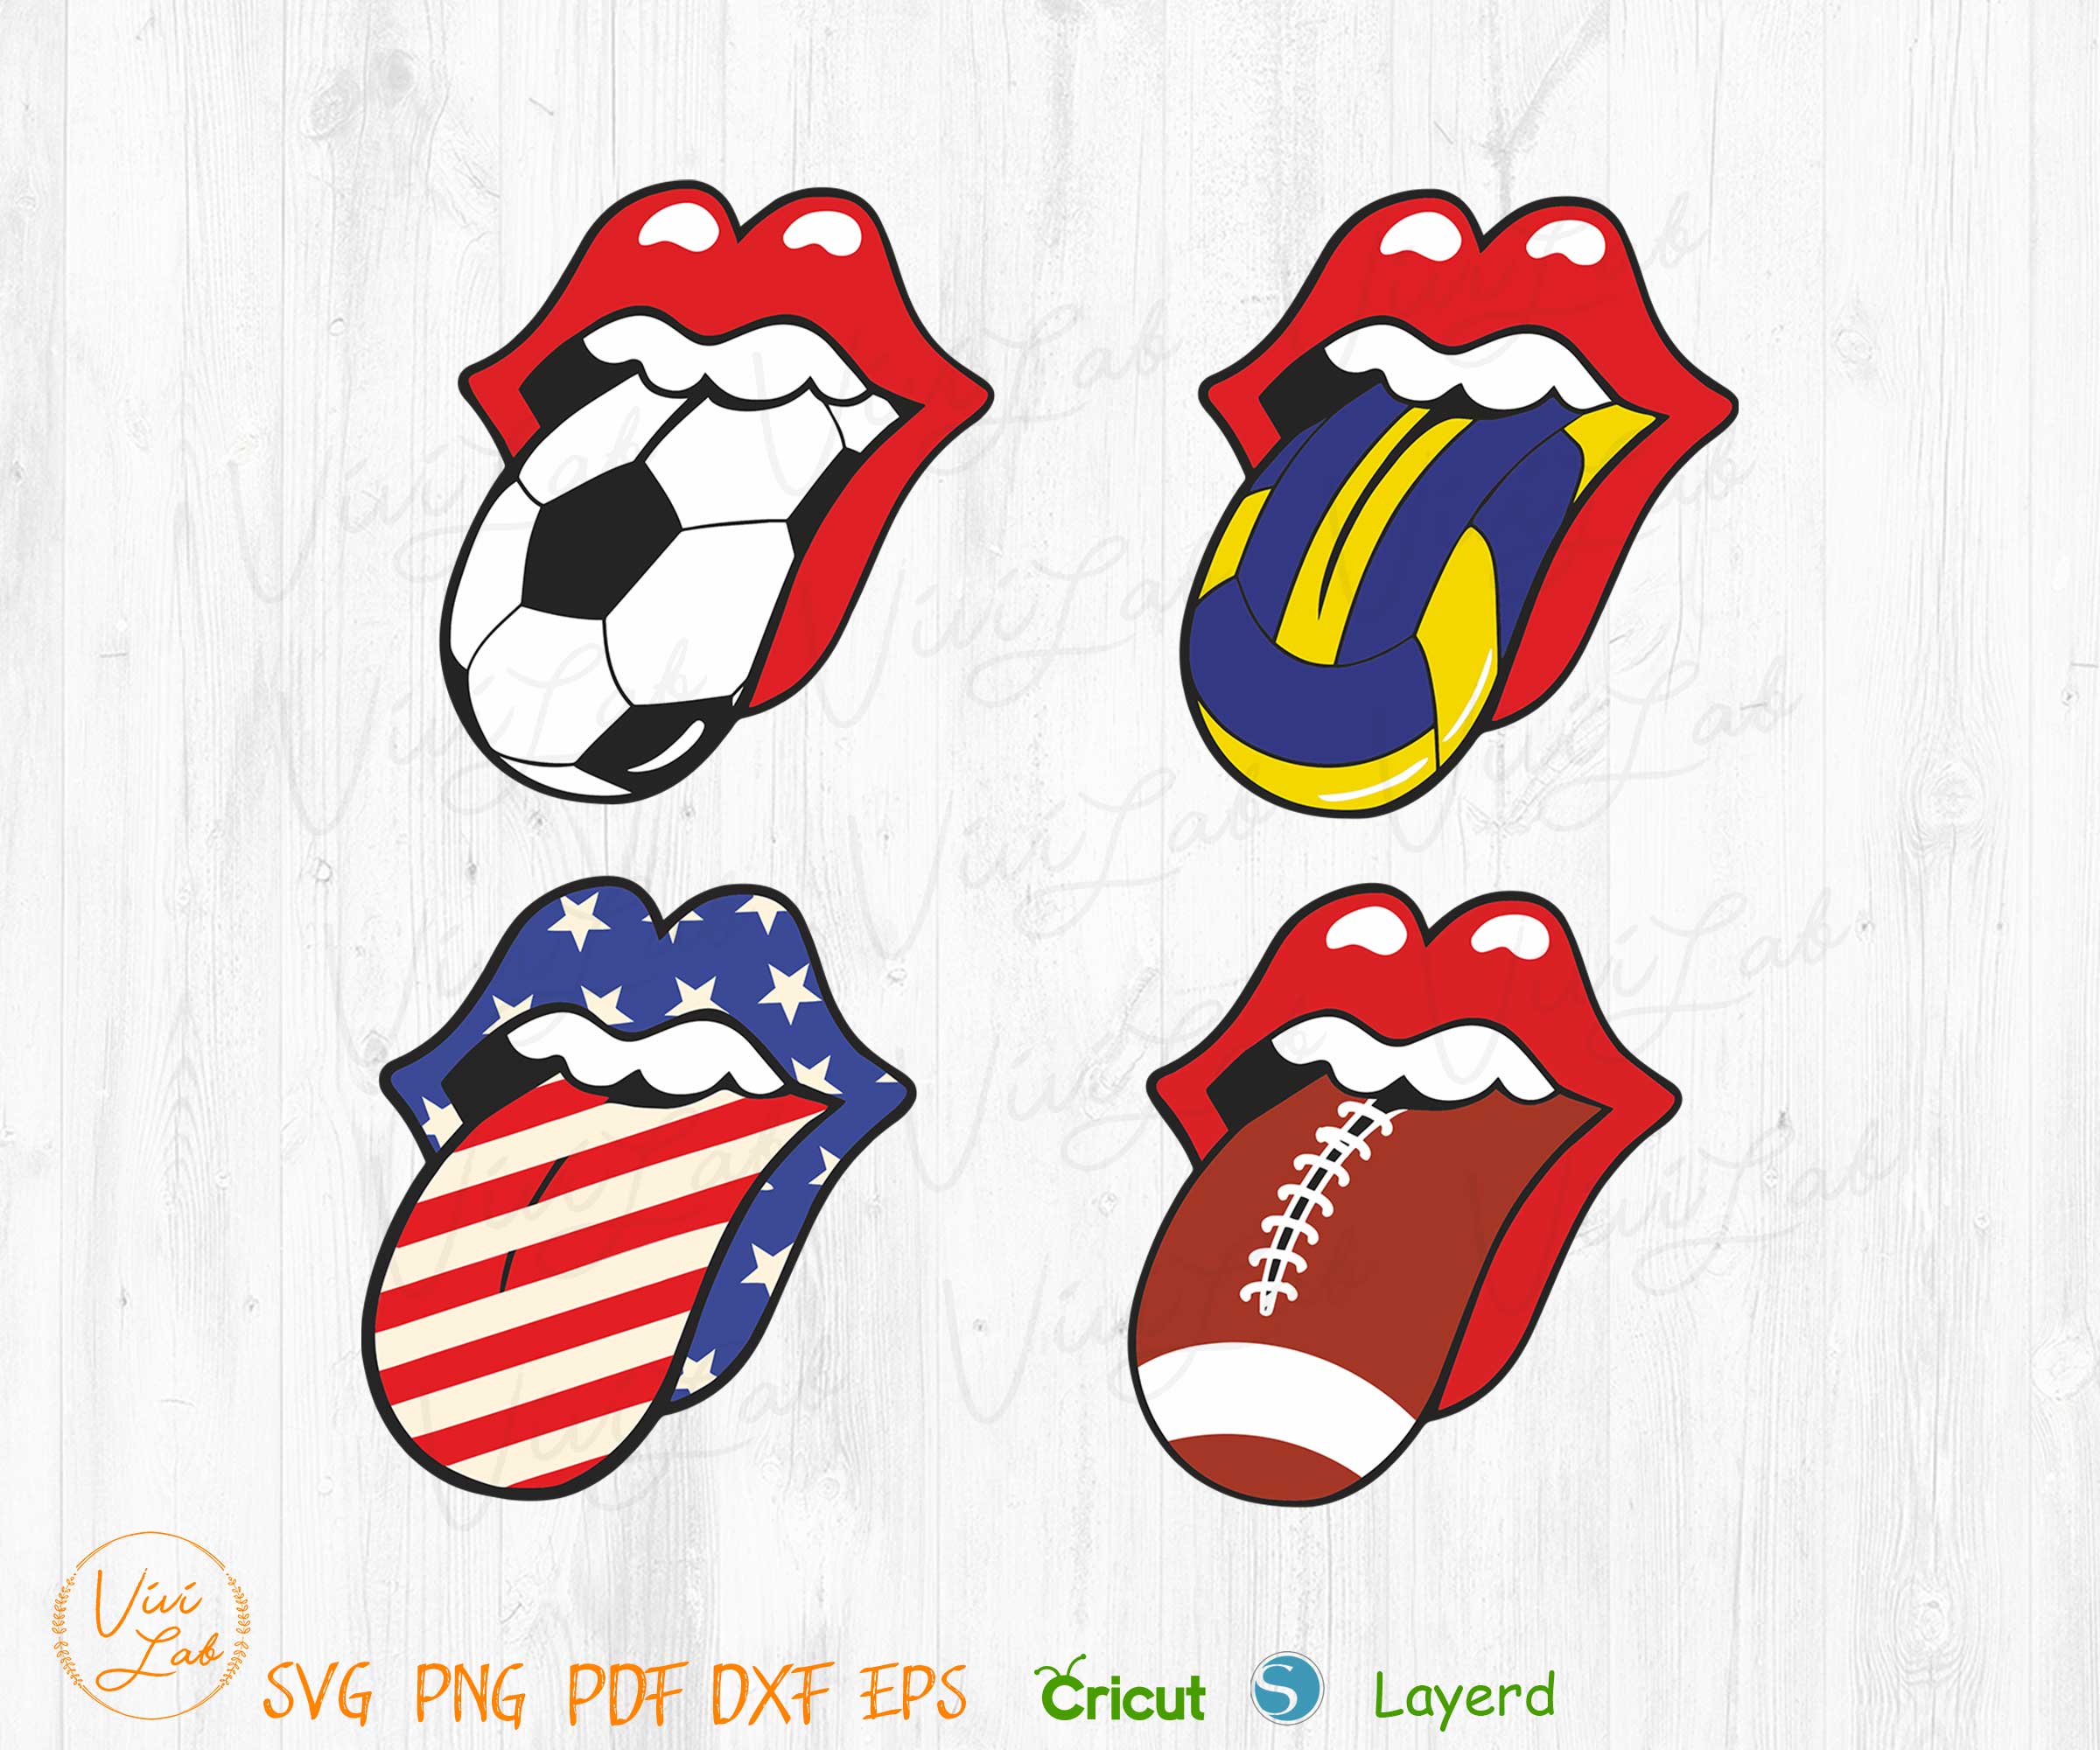 Lips With Tongue svg png clipart